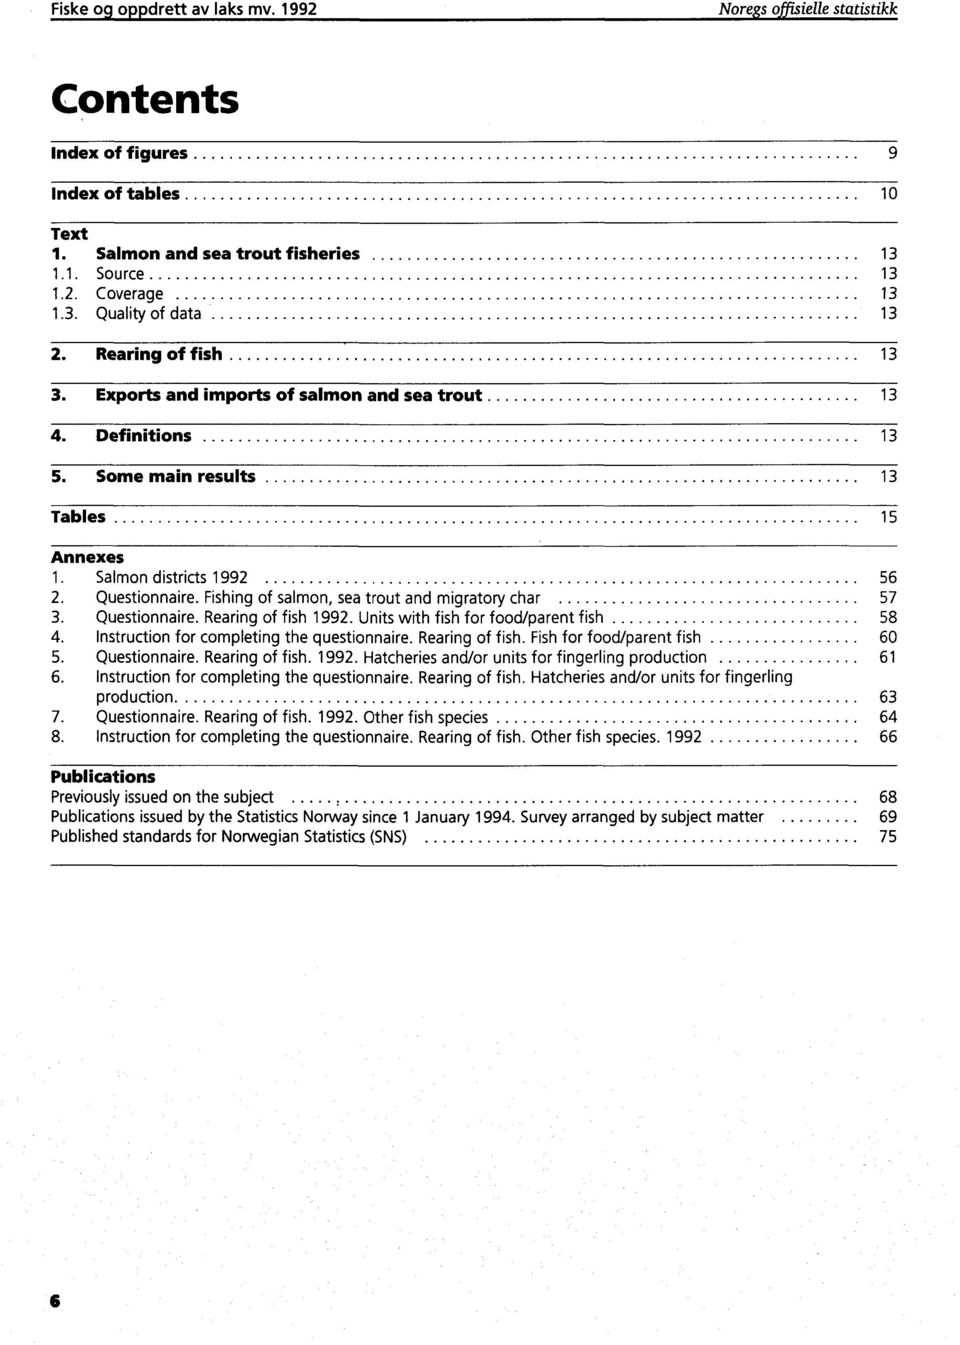 Fishing of salmon, sea trout and migratory char 57 3. Questionnaire. Rearing of fish 1992. Units with fish for food/parent fish 58 4. Instruction for completing the questionnaire. Rearing of fish. Fish for food/parent fish 60 5.